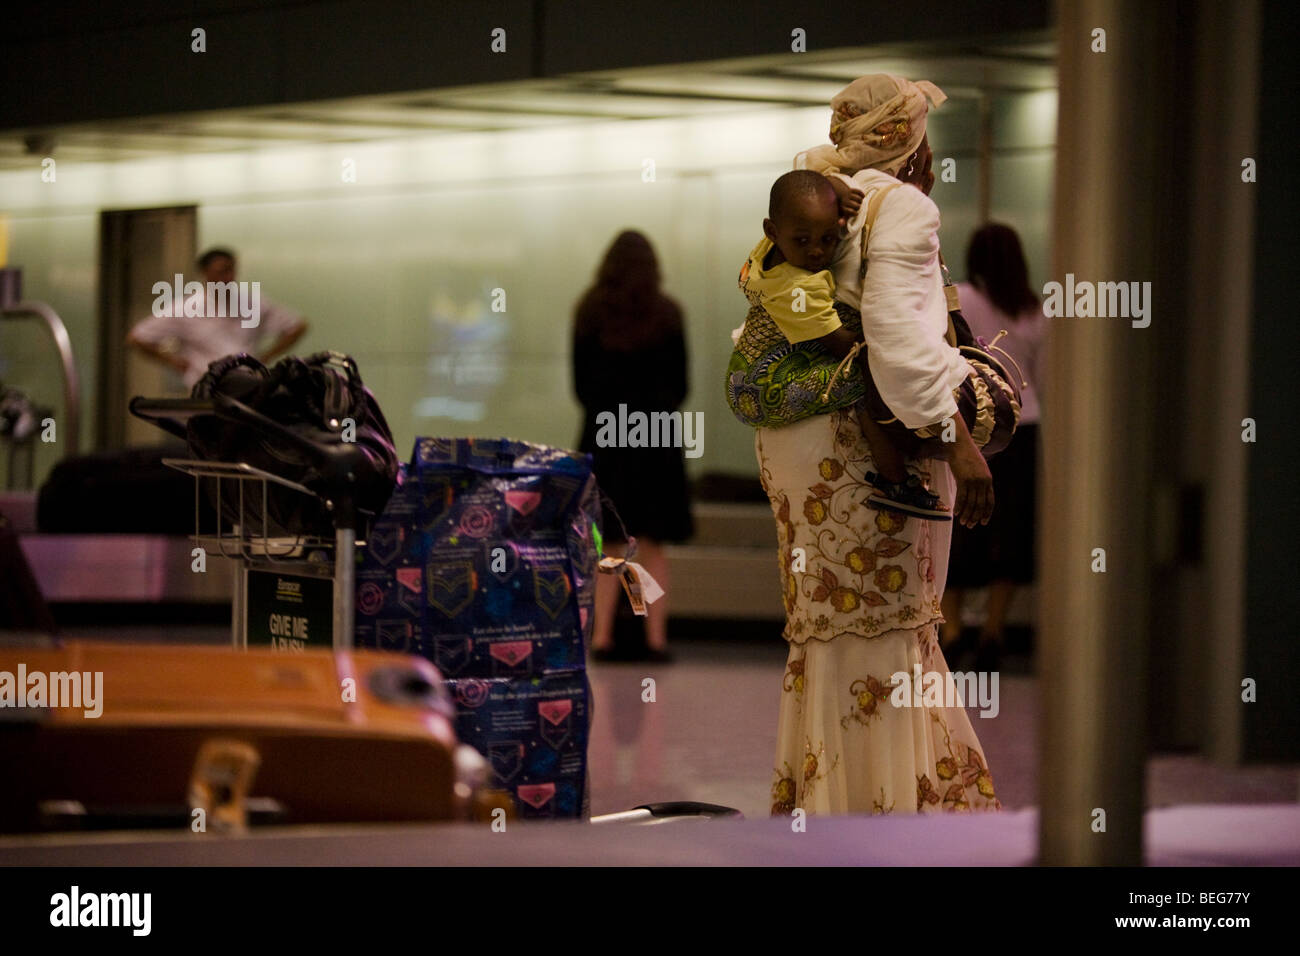 Young child on mother's back await baggage from African flight at Heathrow Airport's Terminal 5. Stock Photo